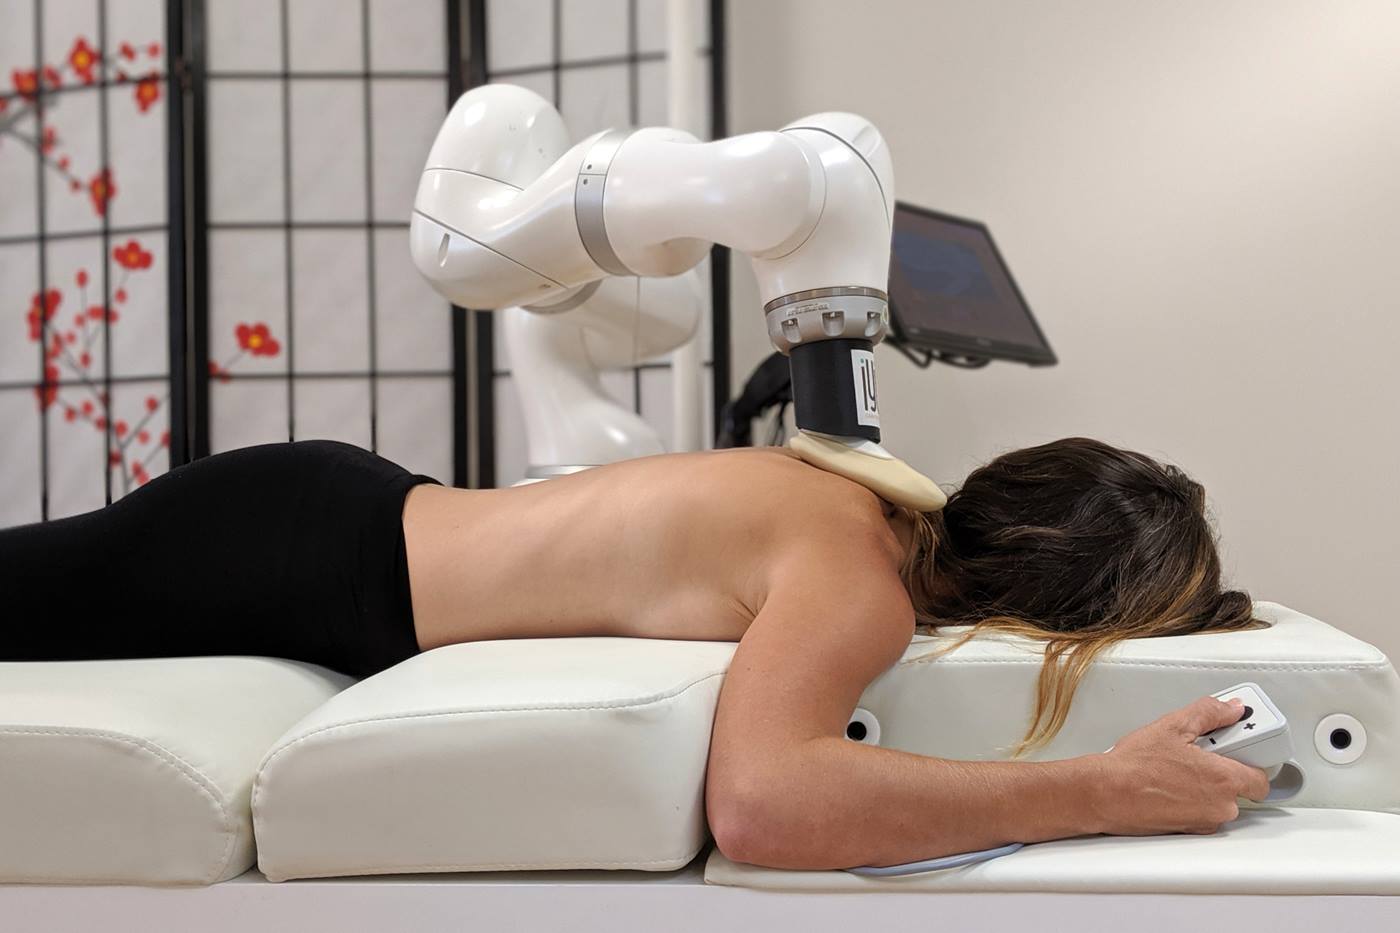 The iYU massage robot, with the integrated LBR Med, is designed to integrate massage into people's daily lives and make the lives of physical therapists easier.